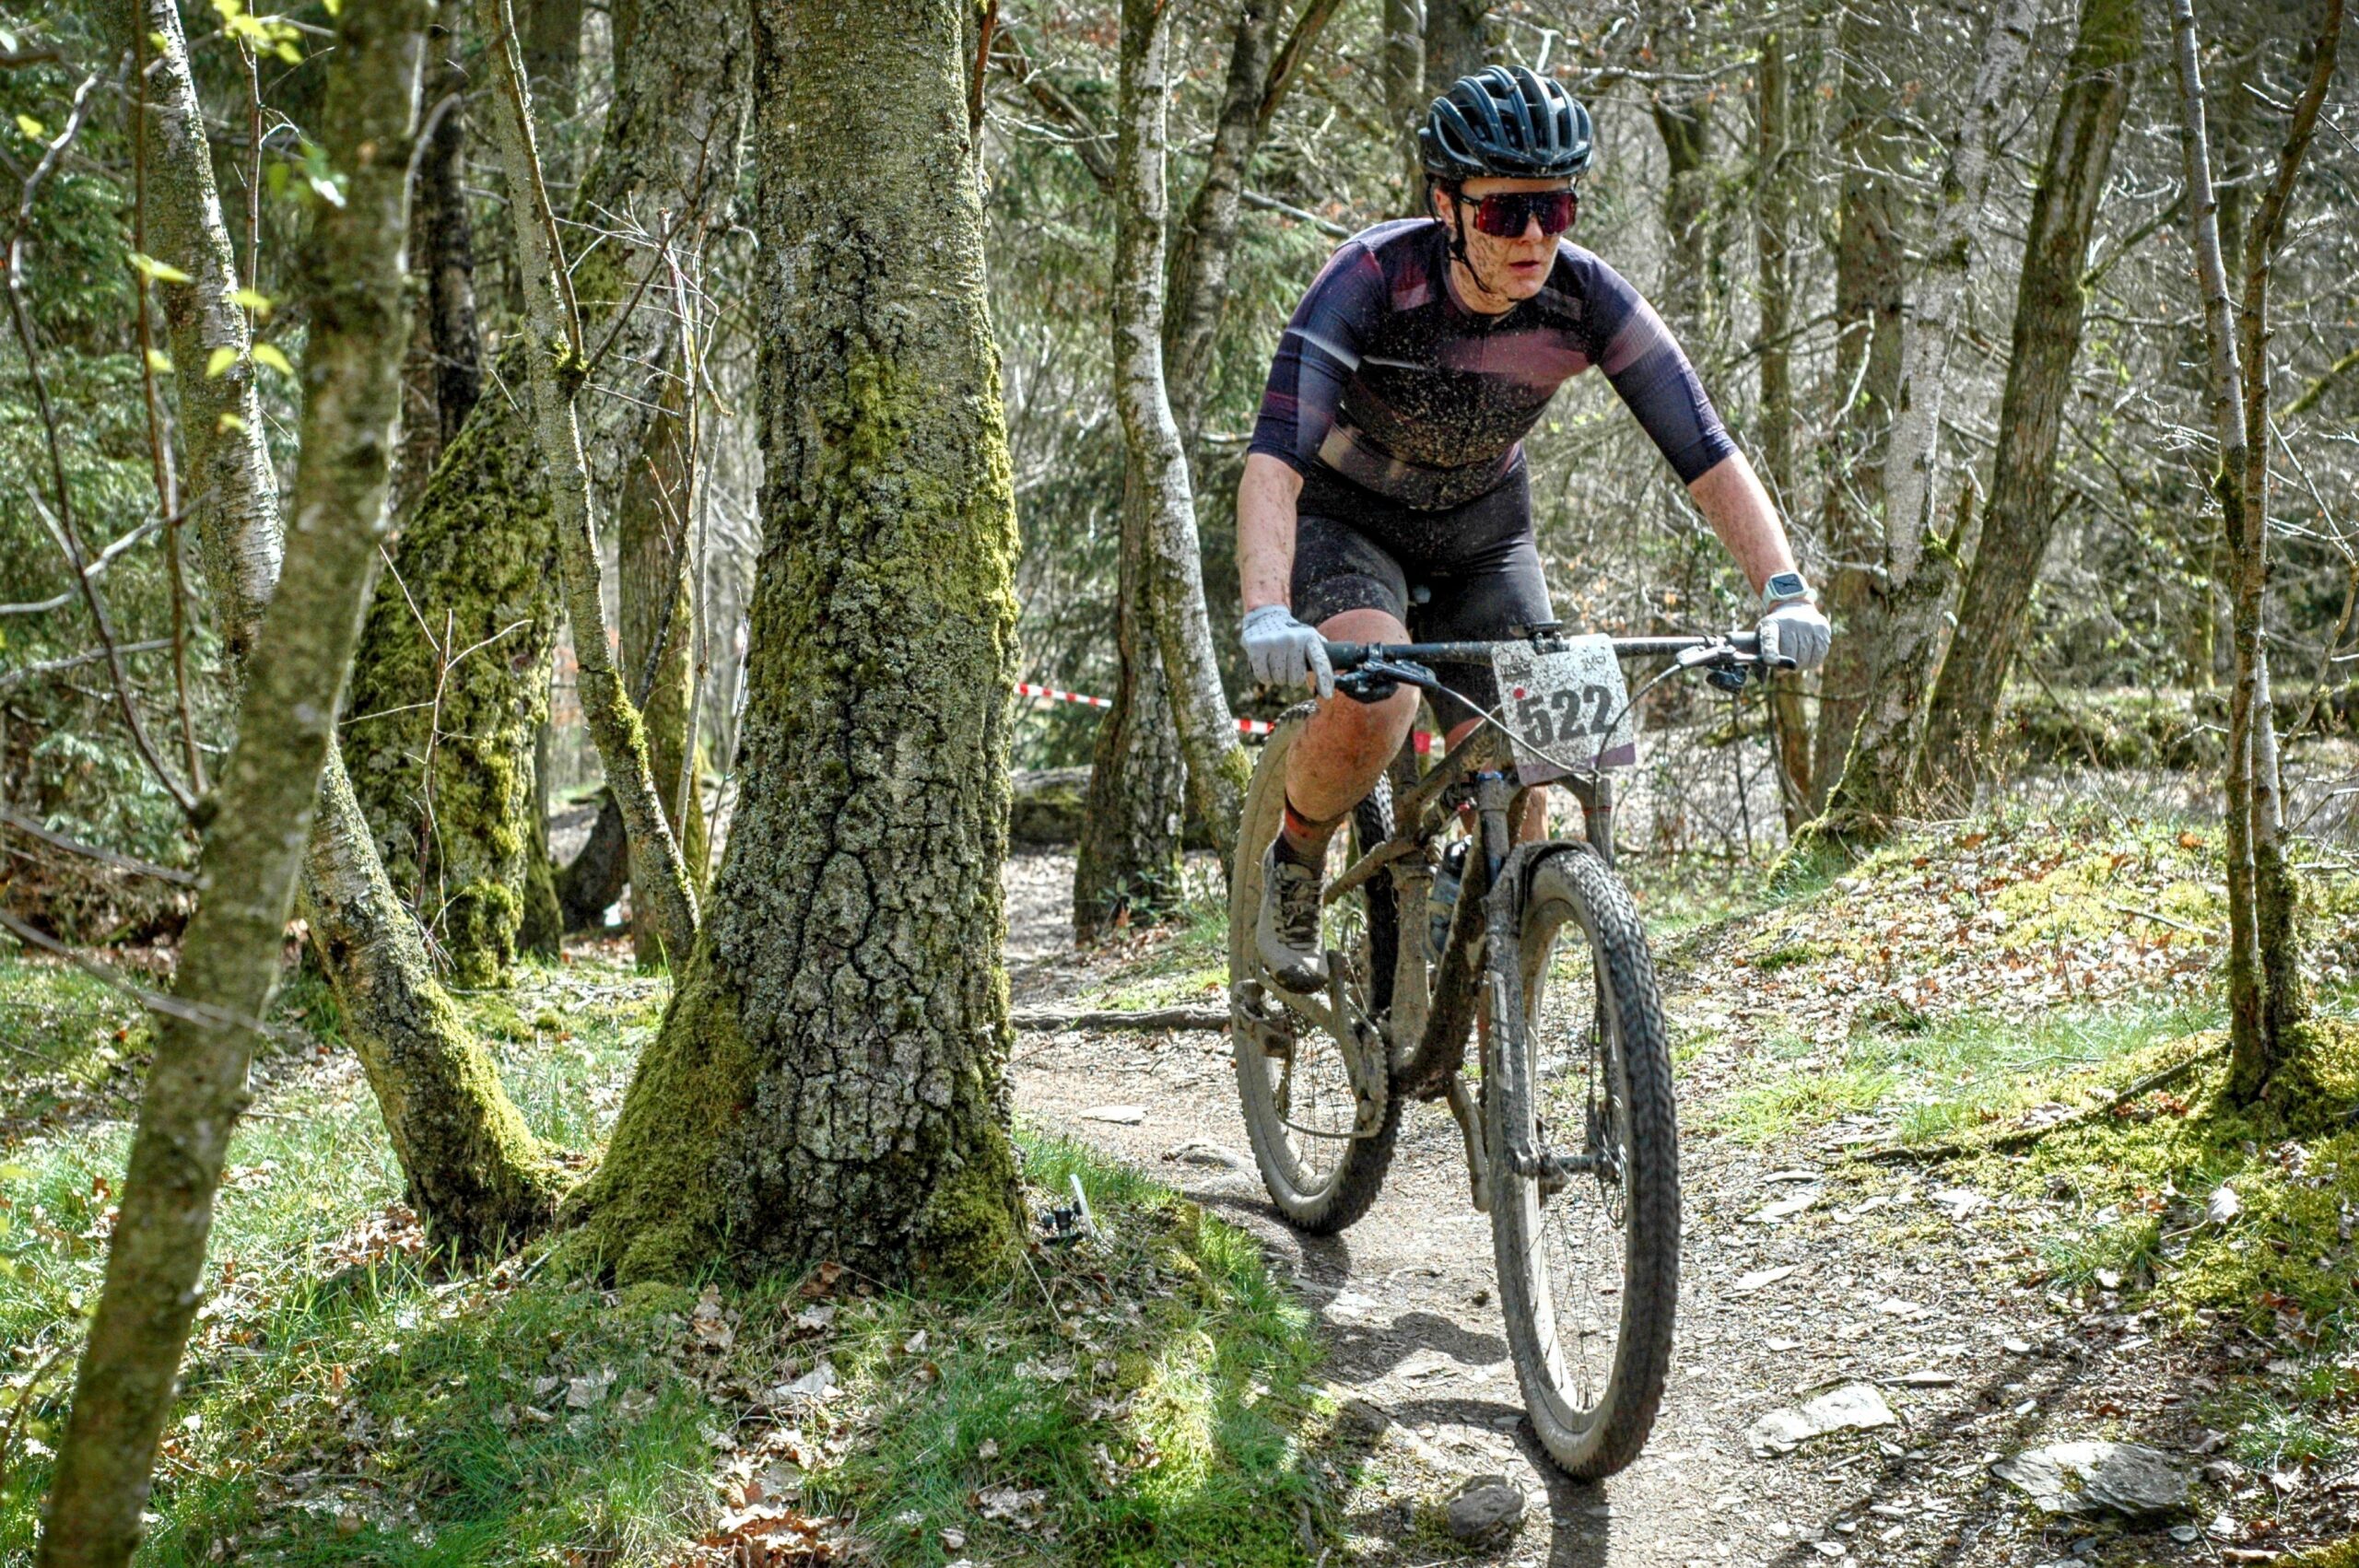 Mountain biker riding through a forest trail, wearing a helmet, sunglasses, and cycling gear, with a race number 522 on the bike